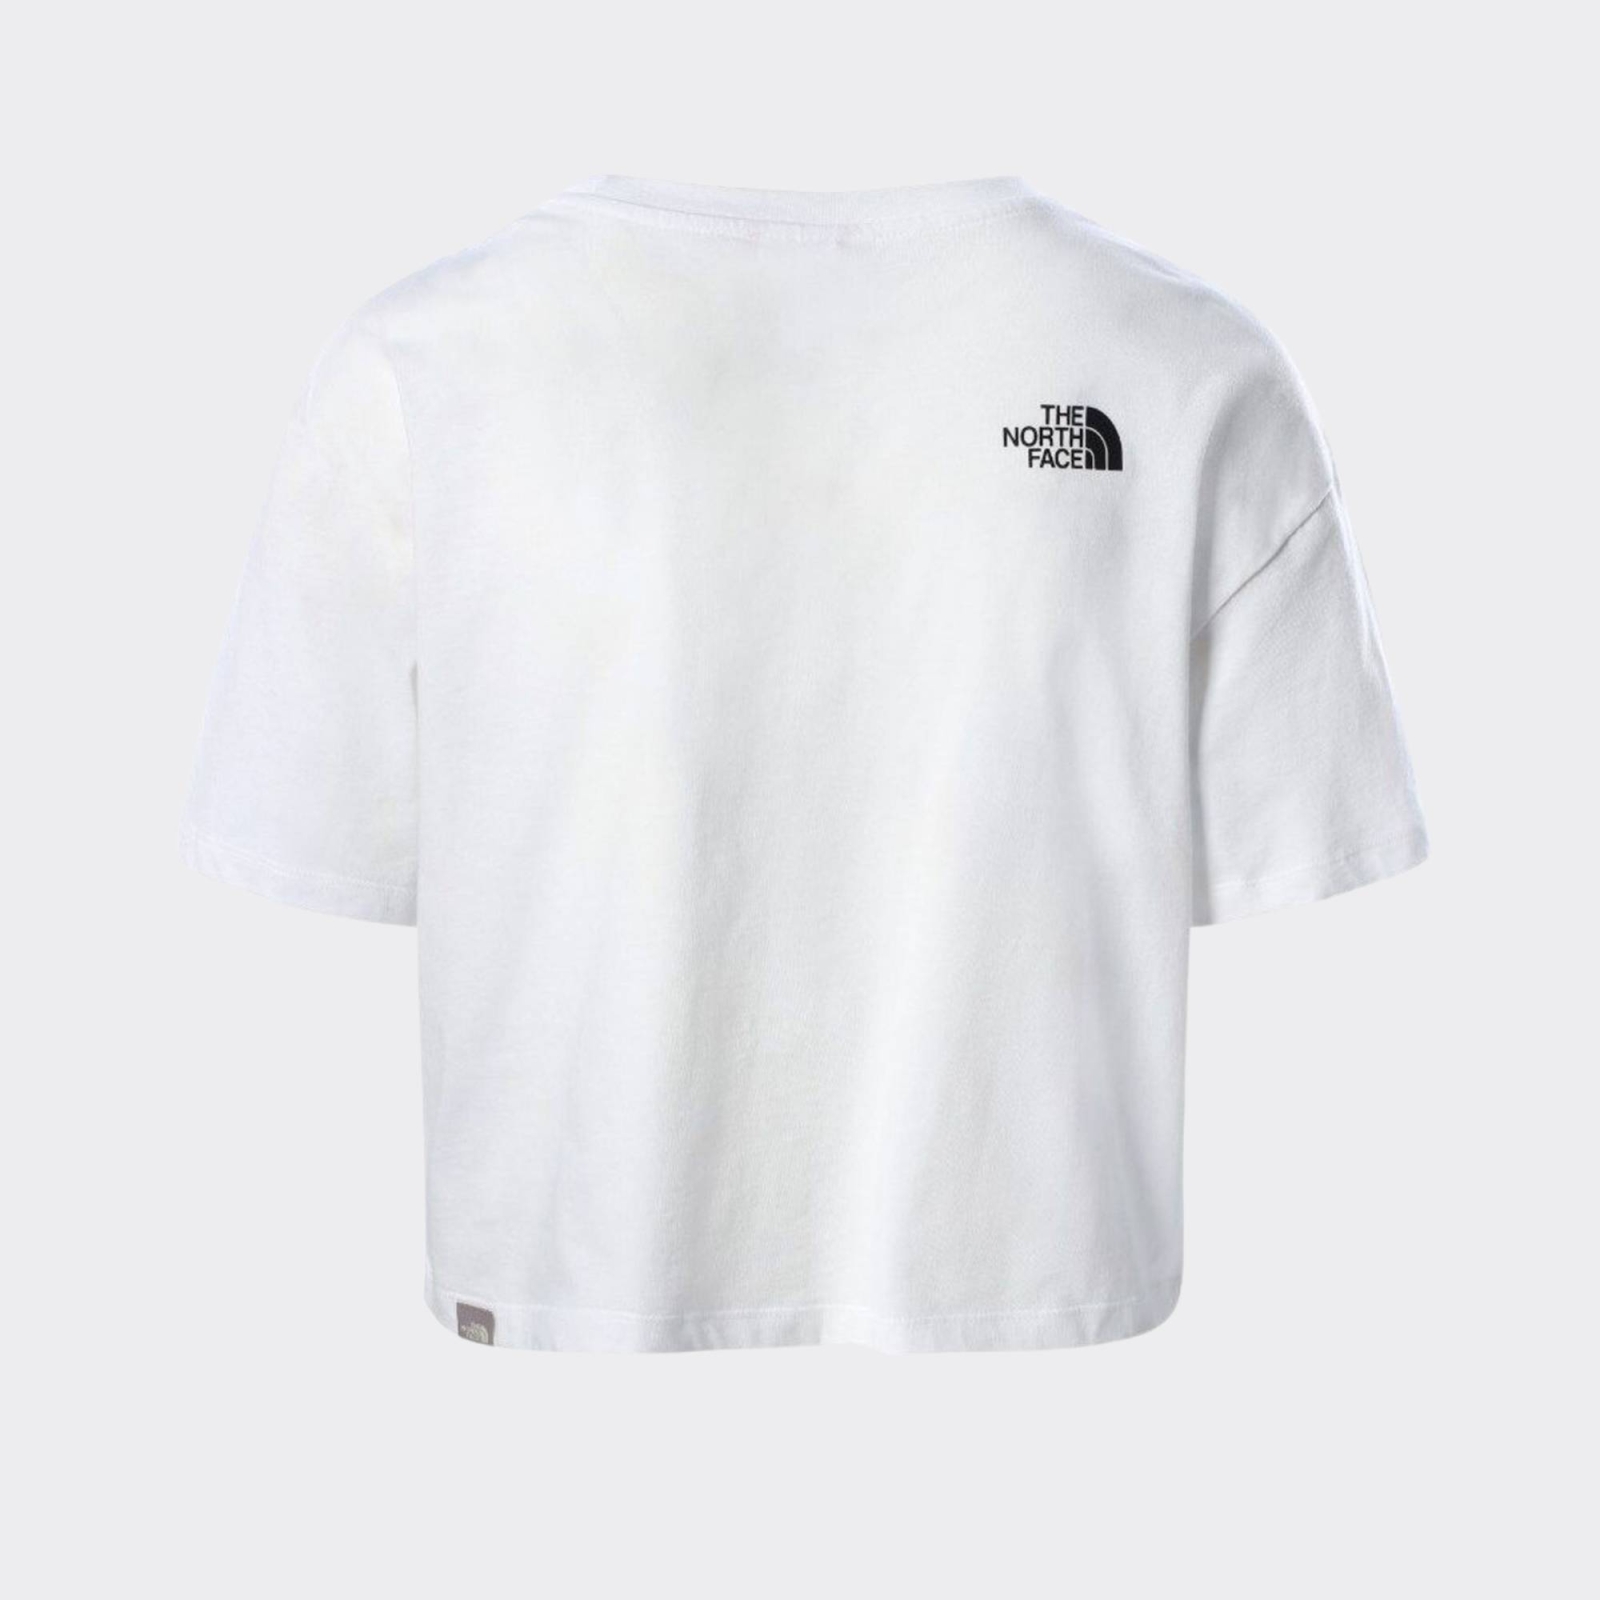 THE NORTH FACE WOMEN’S CROPPED EASY TEE